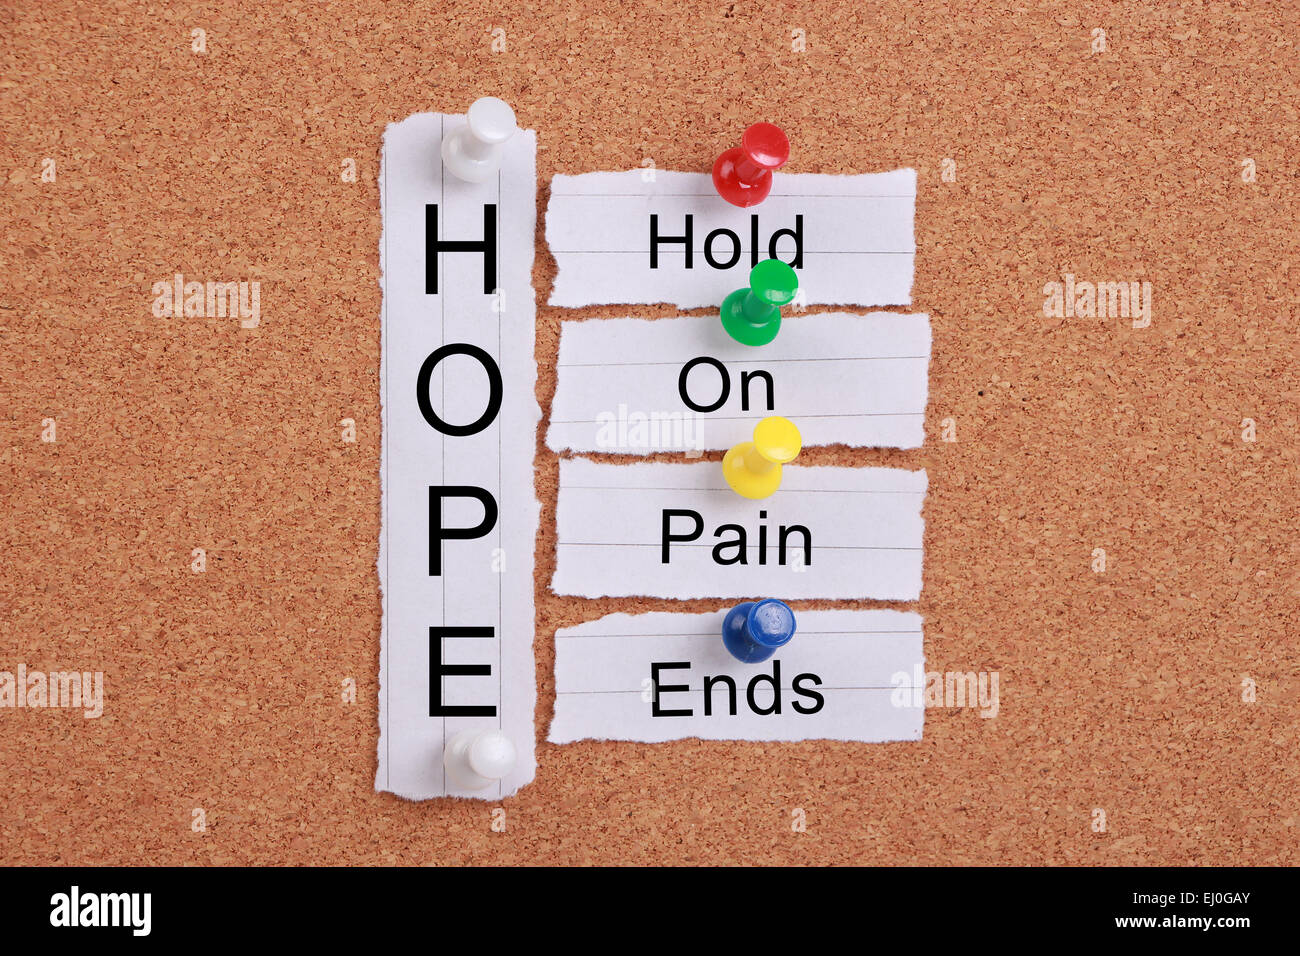 Hope concept with some related words pinned on cork board. Stock Photo